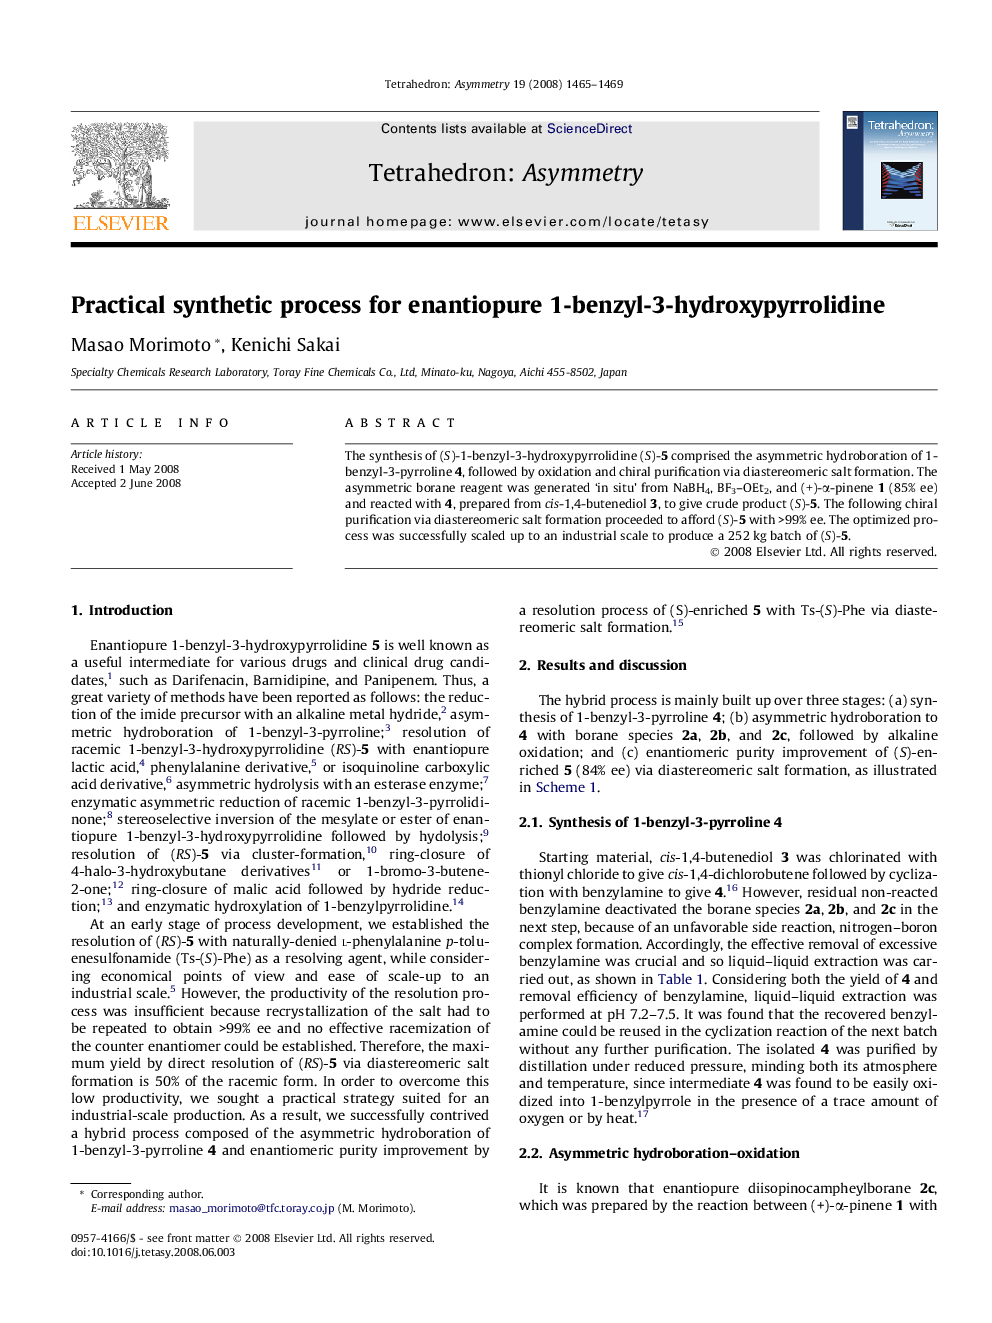 Practical synthetic process for enantiopure 1-benzyl-3-hydroxypyrrolidine